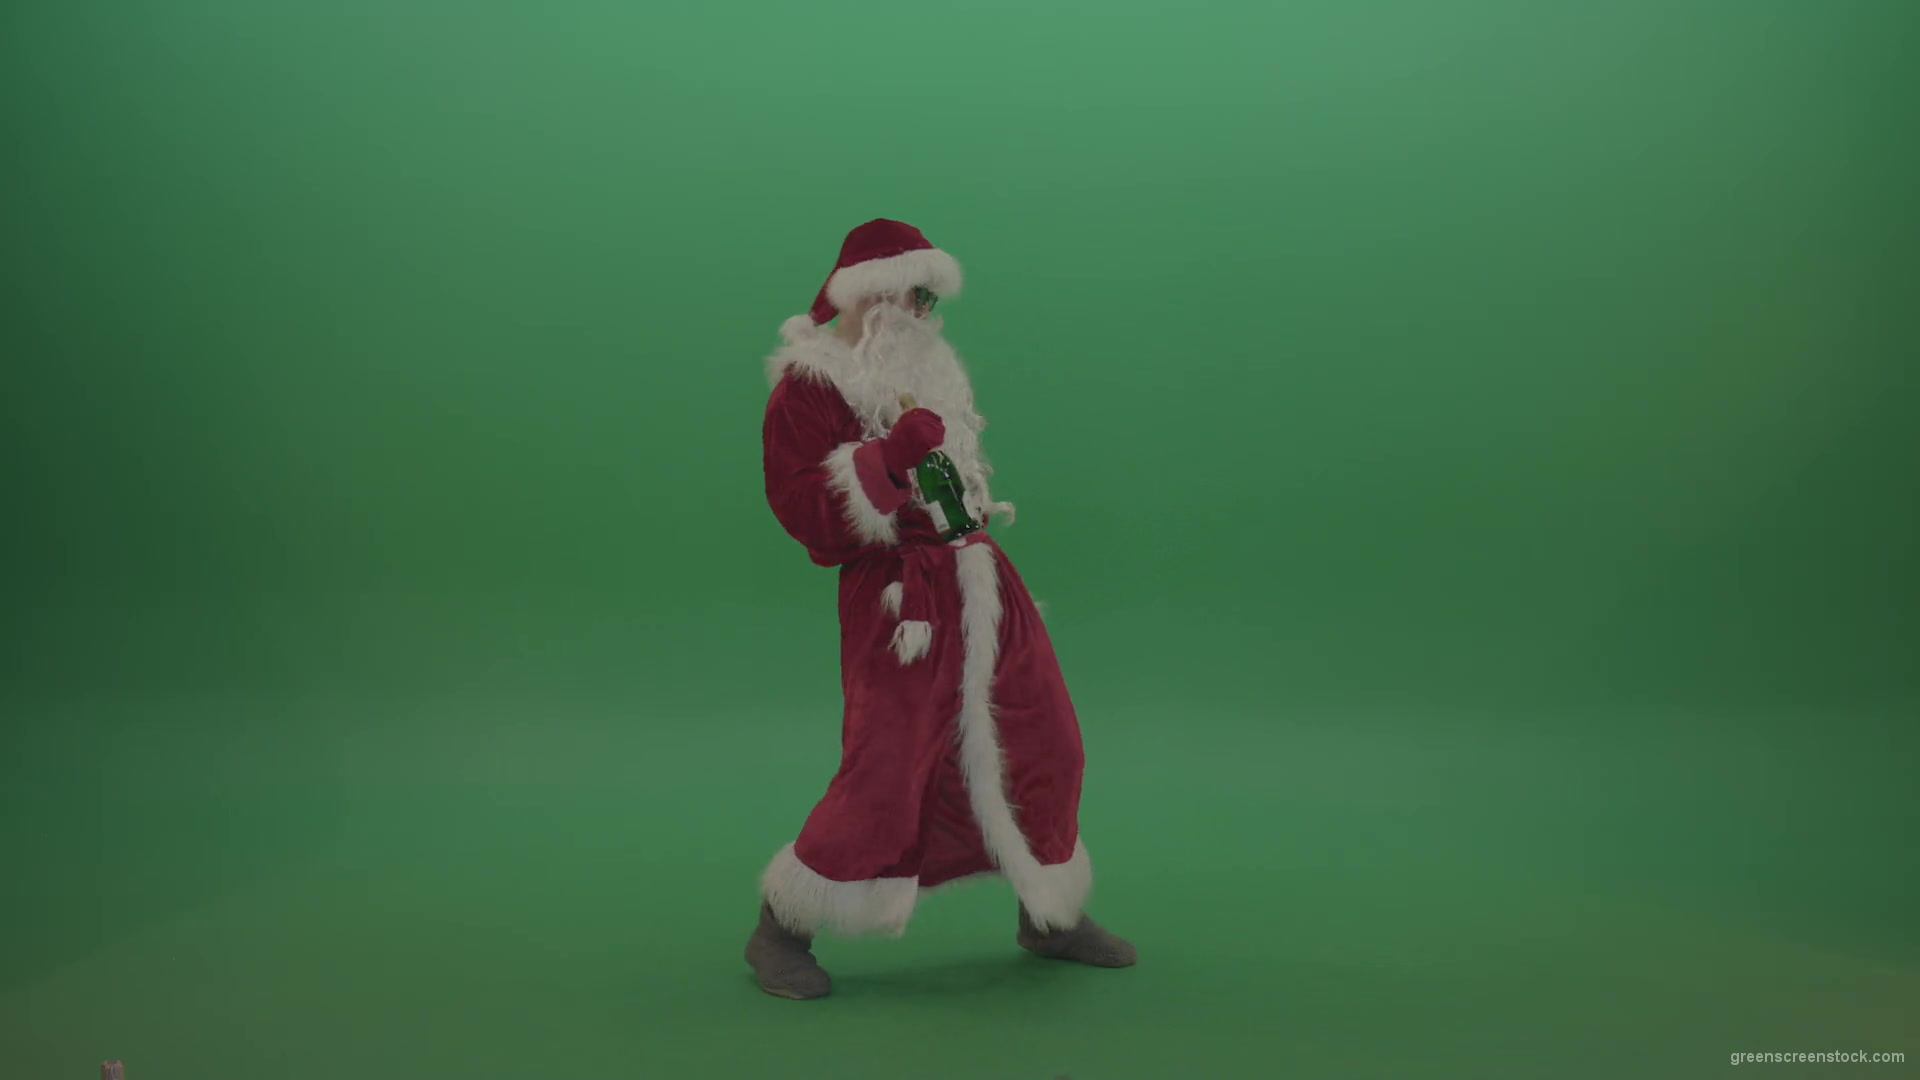 Drunk-santa-in-black-glasses-with-a-bottle-of-wine-staggers-across-the-green-screen-background-1920_008 Green Screen Stock